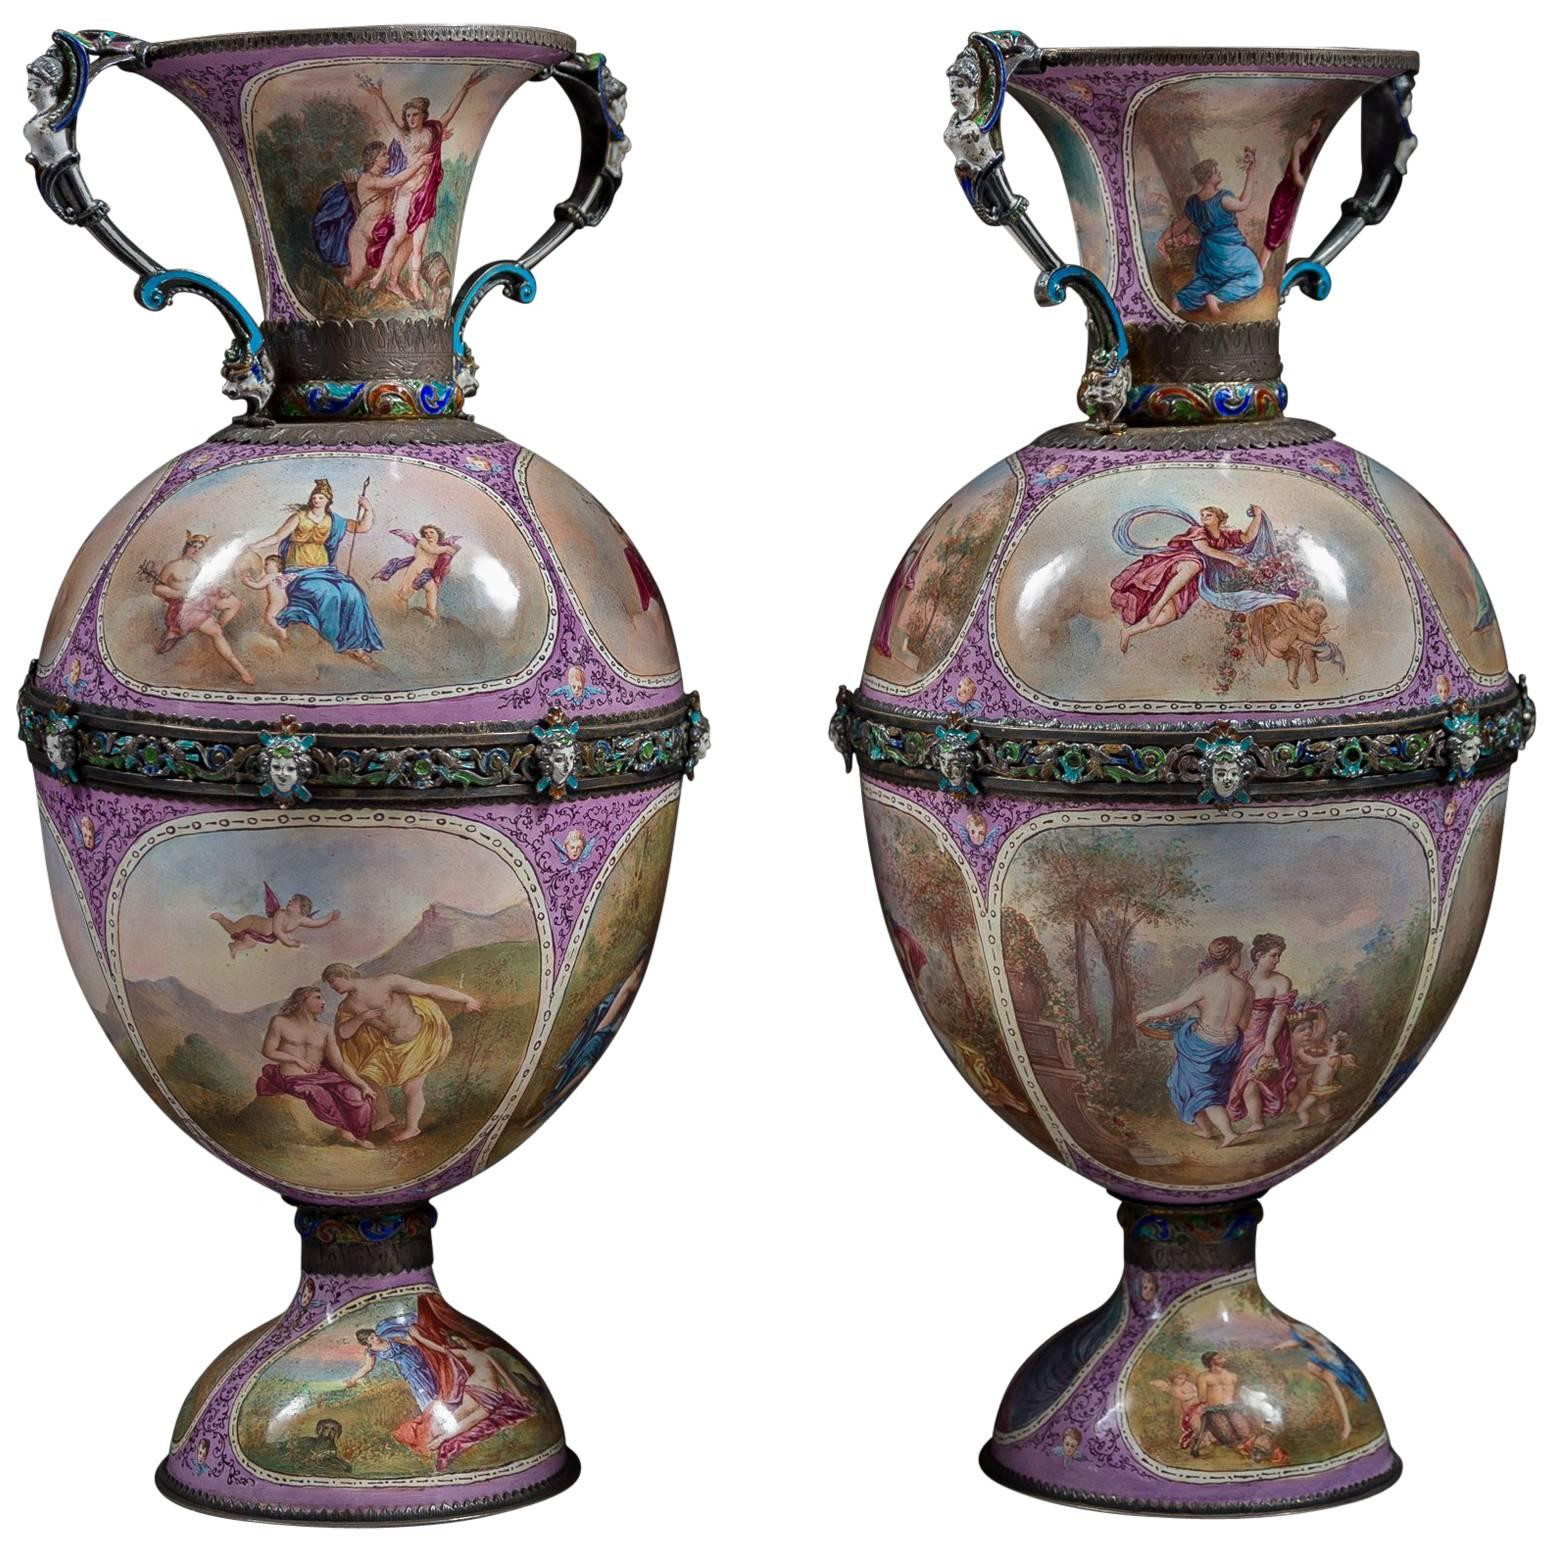 16 Perfect Antique German Porcelain Vases 2024 free download antique german porcelain vases of a pair of large early 20th century japanese cloisionne enamel palace intended for a pair of large early 20th century japanese cloisionne enamel palace vases